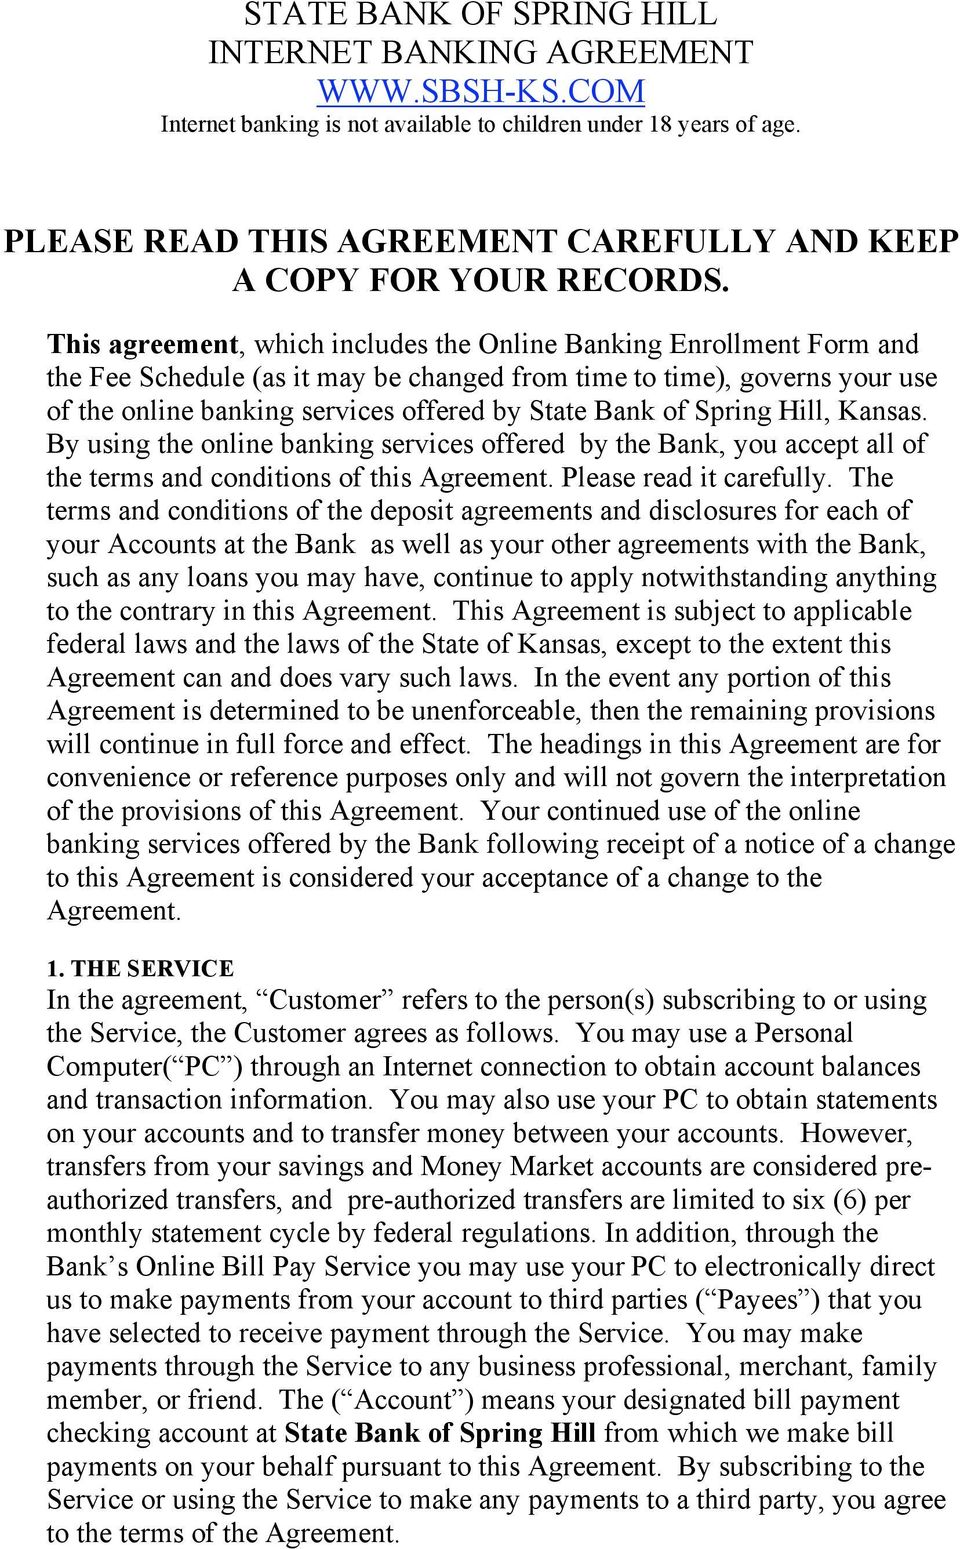 This agreement, which includes the Online Banking Enrollment Form and the Fee Schedule (as it may be changed from time to time), governs your use of the online banking services offered by State Bank